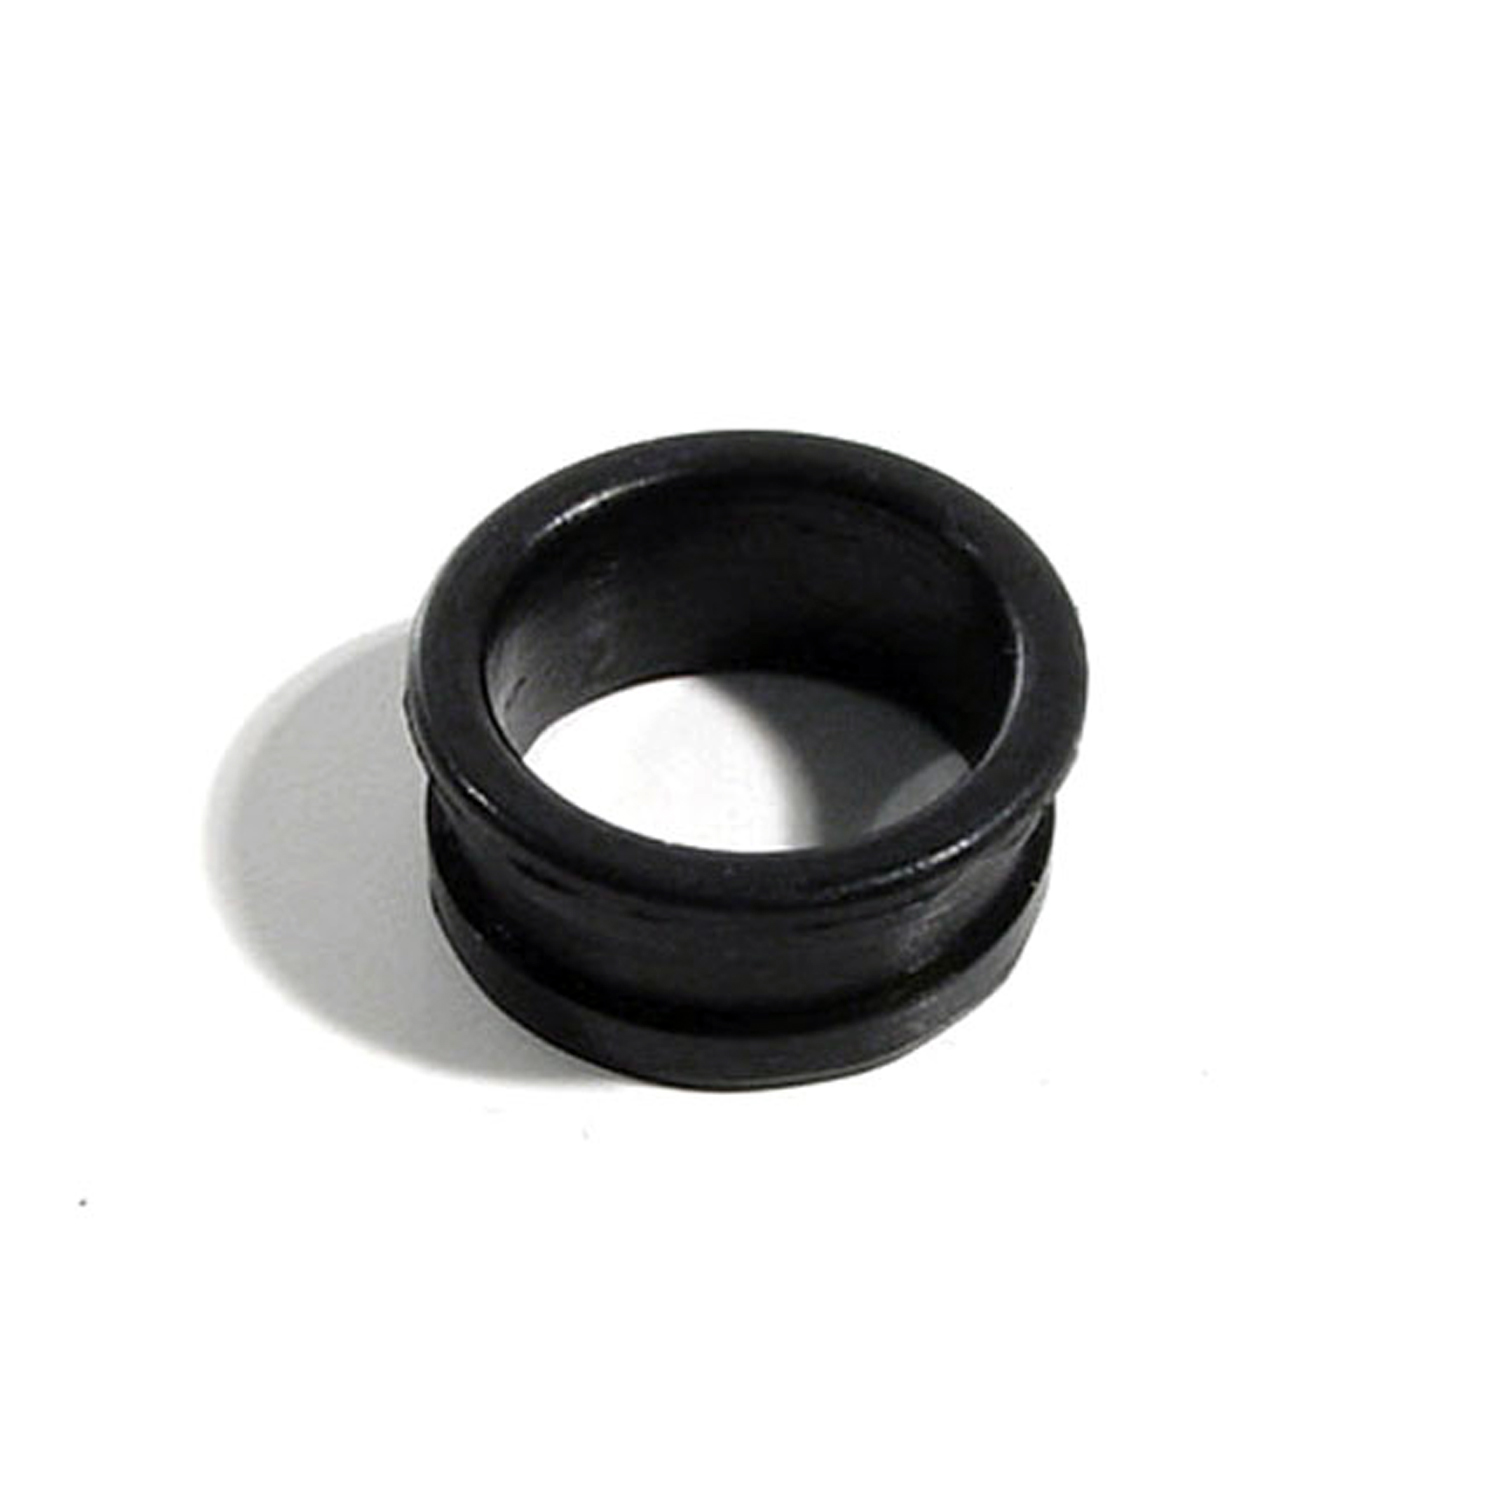 1939 Cadillac Series 60 Special Door Ferrule Grommet. Made of black rubber-MP 546-H